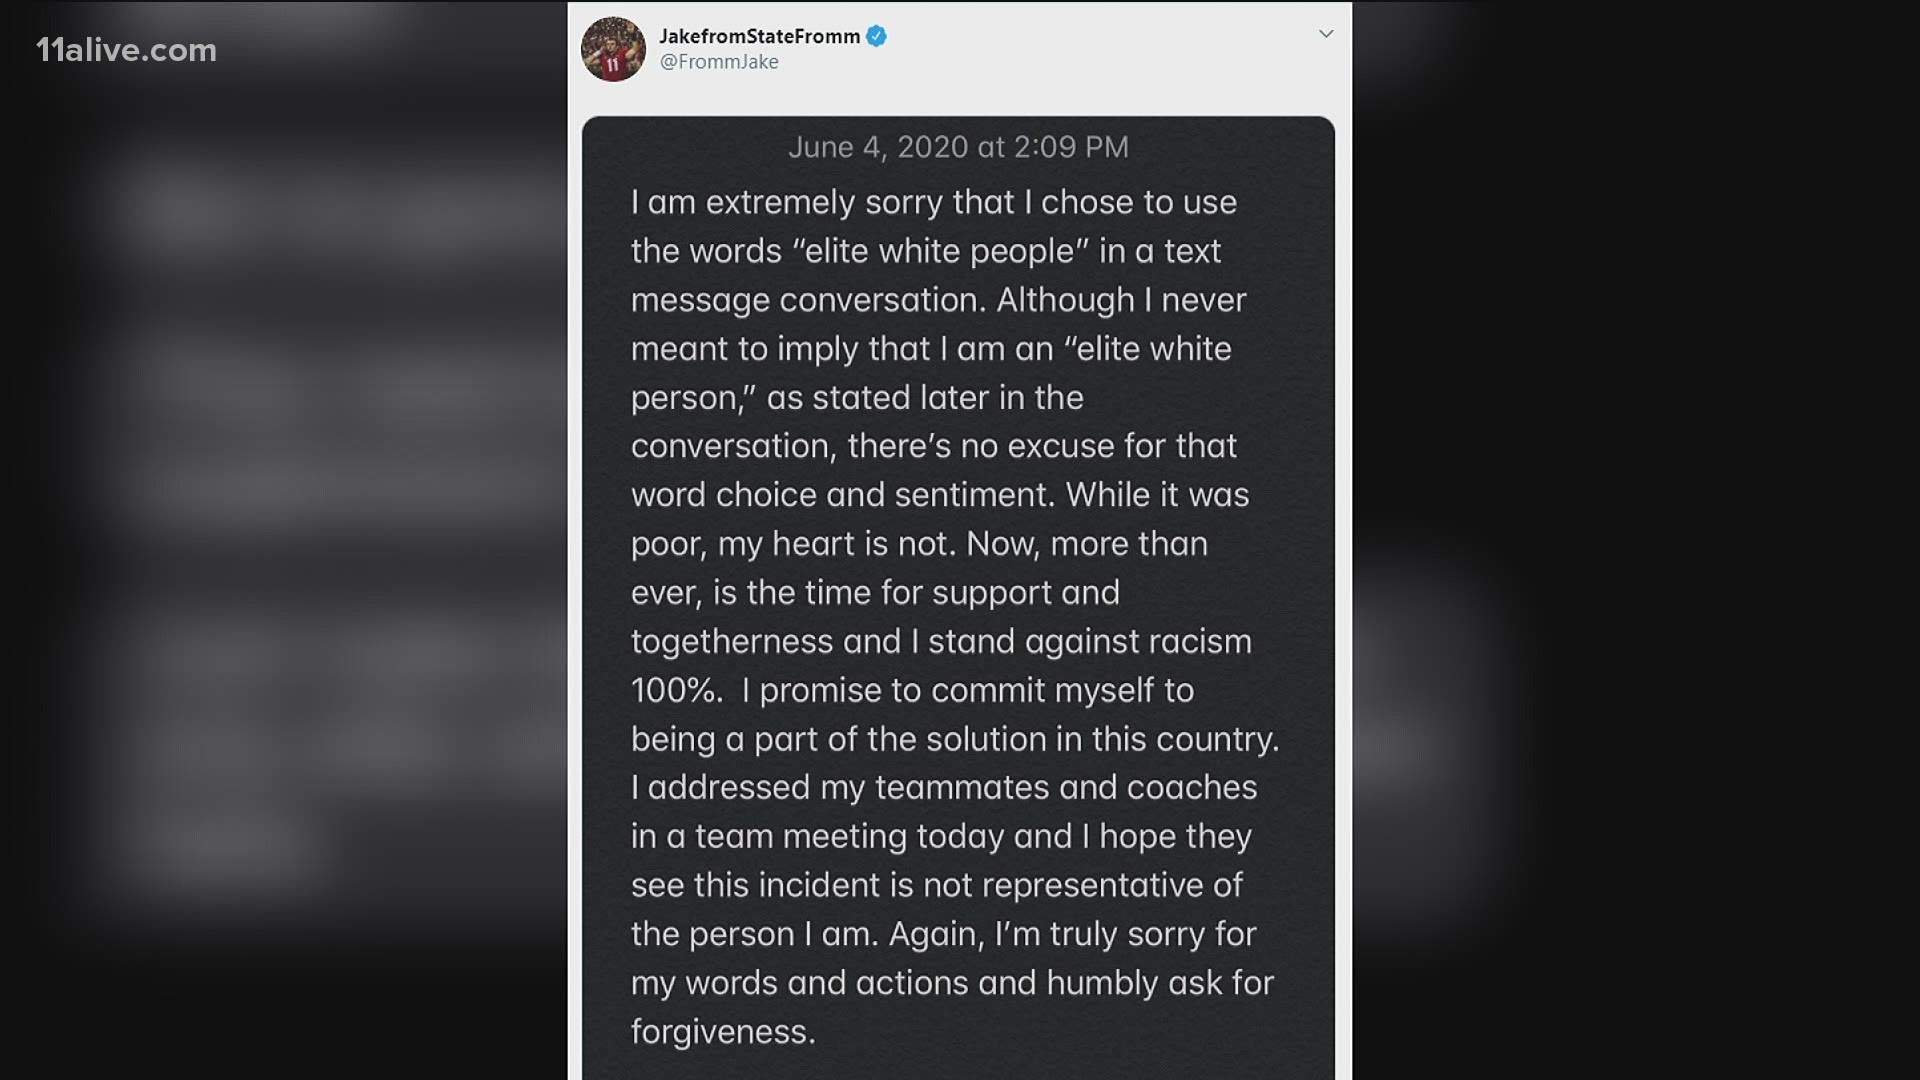 Former UGA quarterback Jake Fromm issued an apology Thursday after a text message circulated in which he referred to "elite white people."